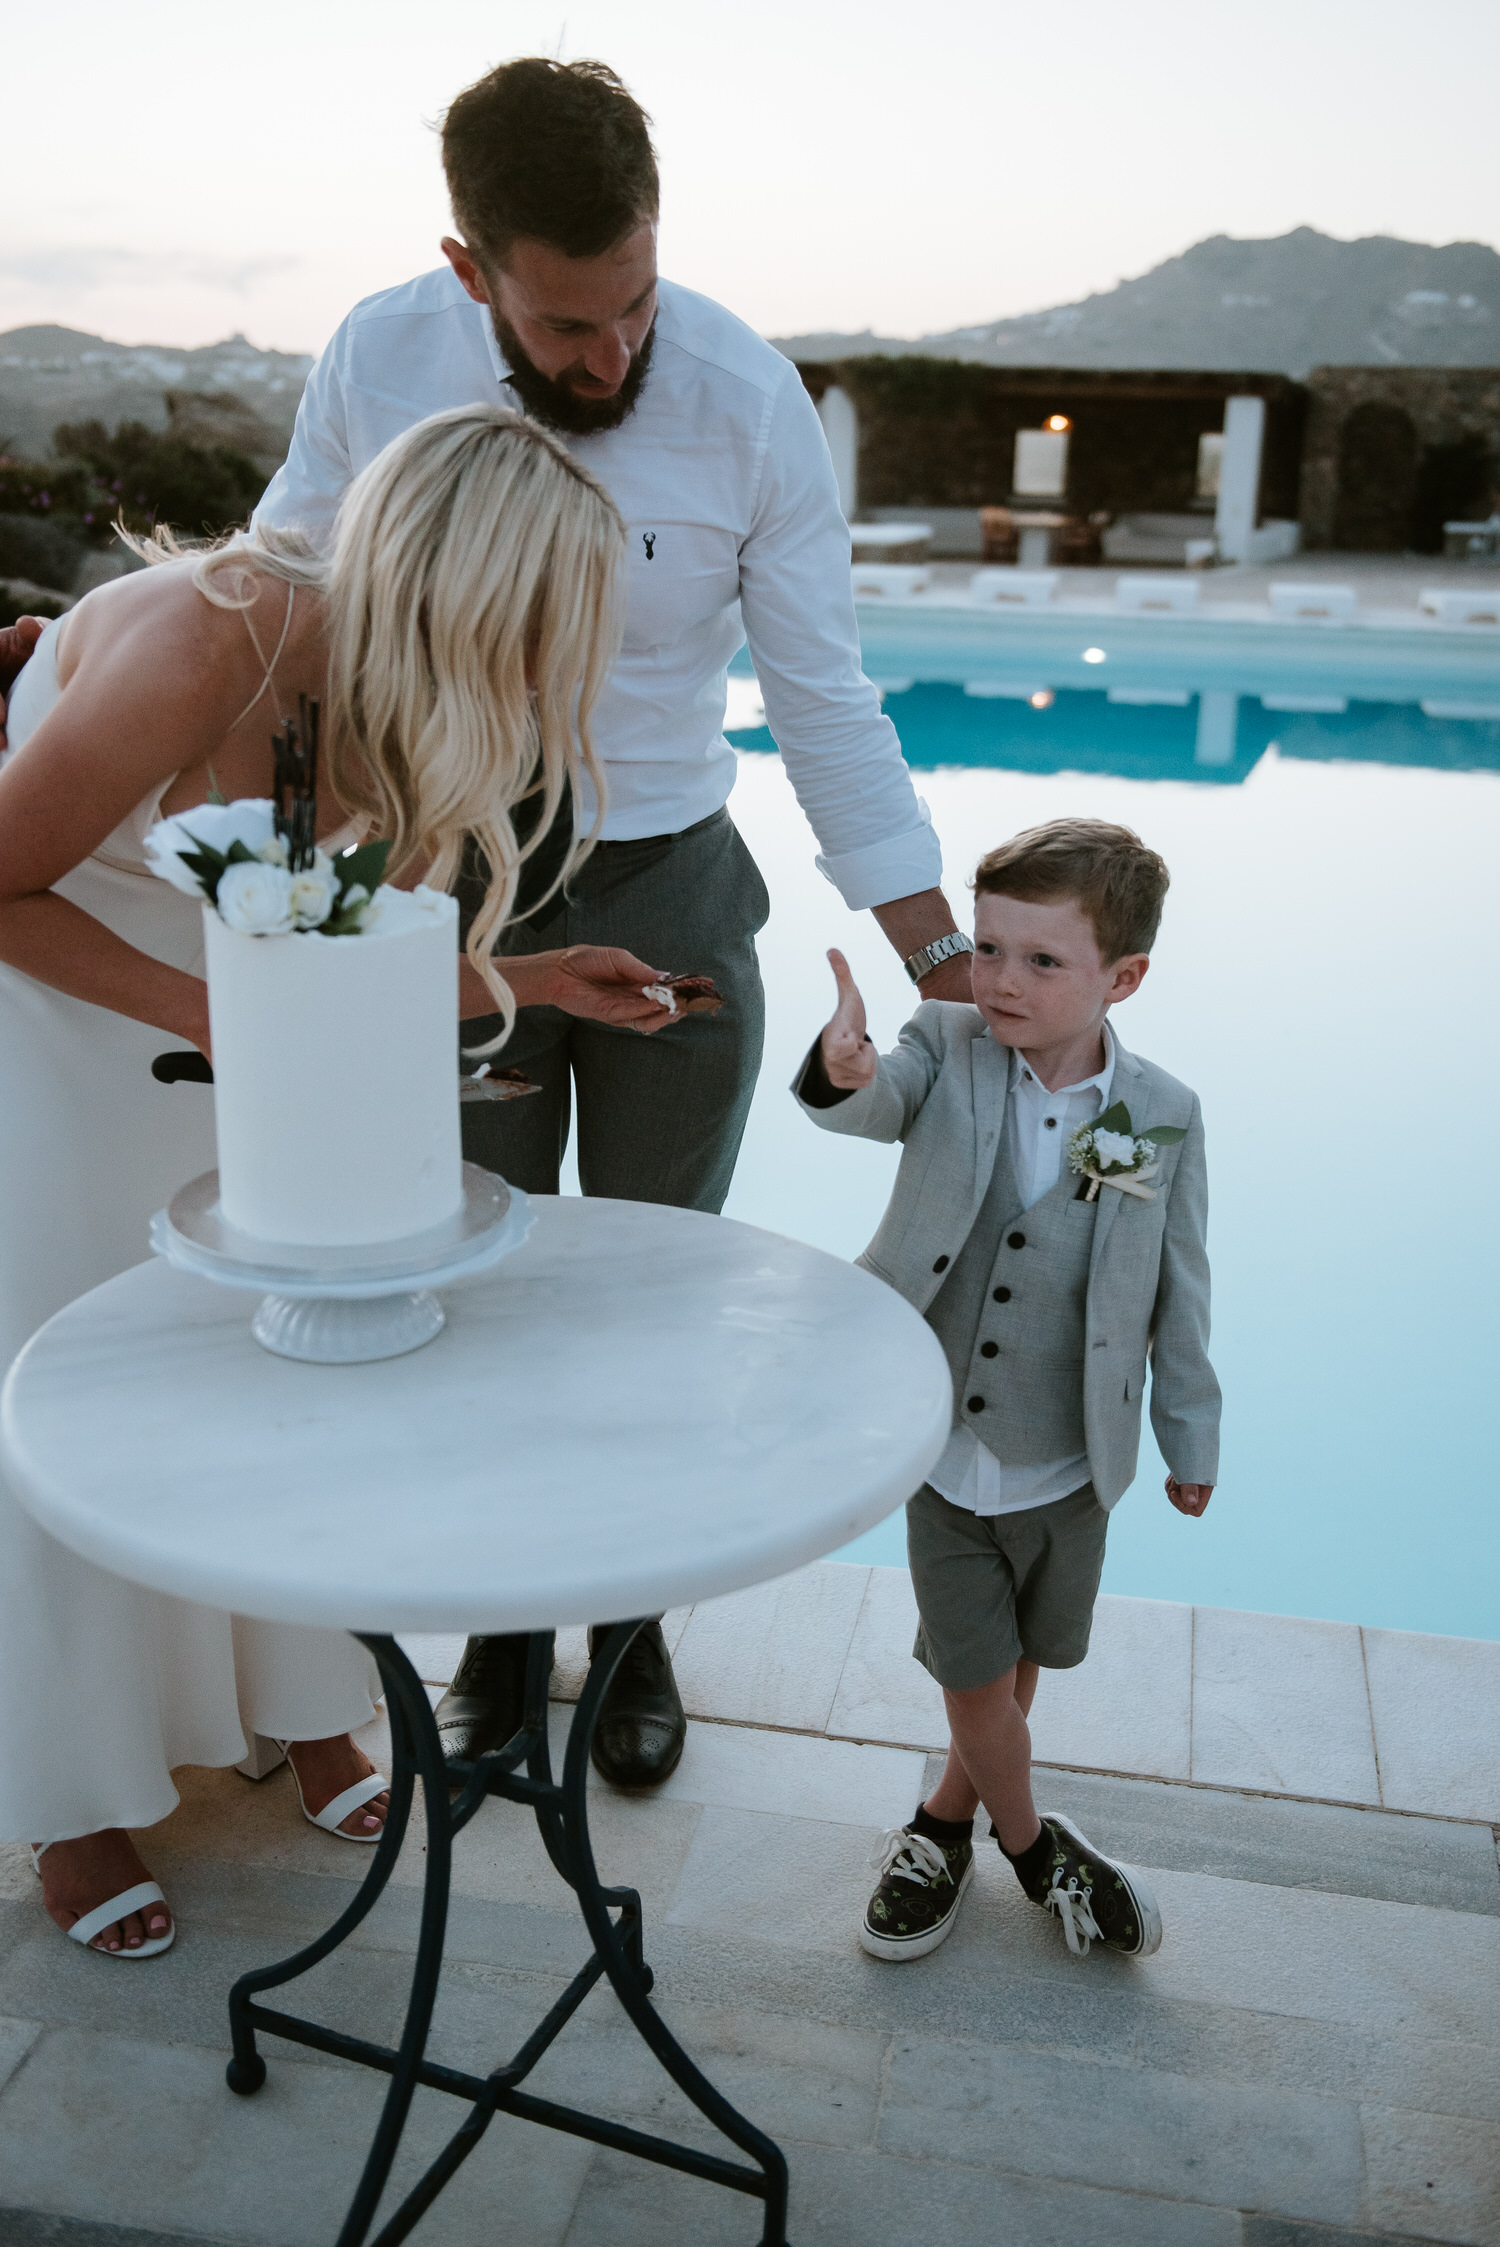 Mykonos wedding photographer: kid gives thumbs up for the cake standing next to bride and groom with pool in the background.